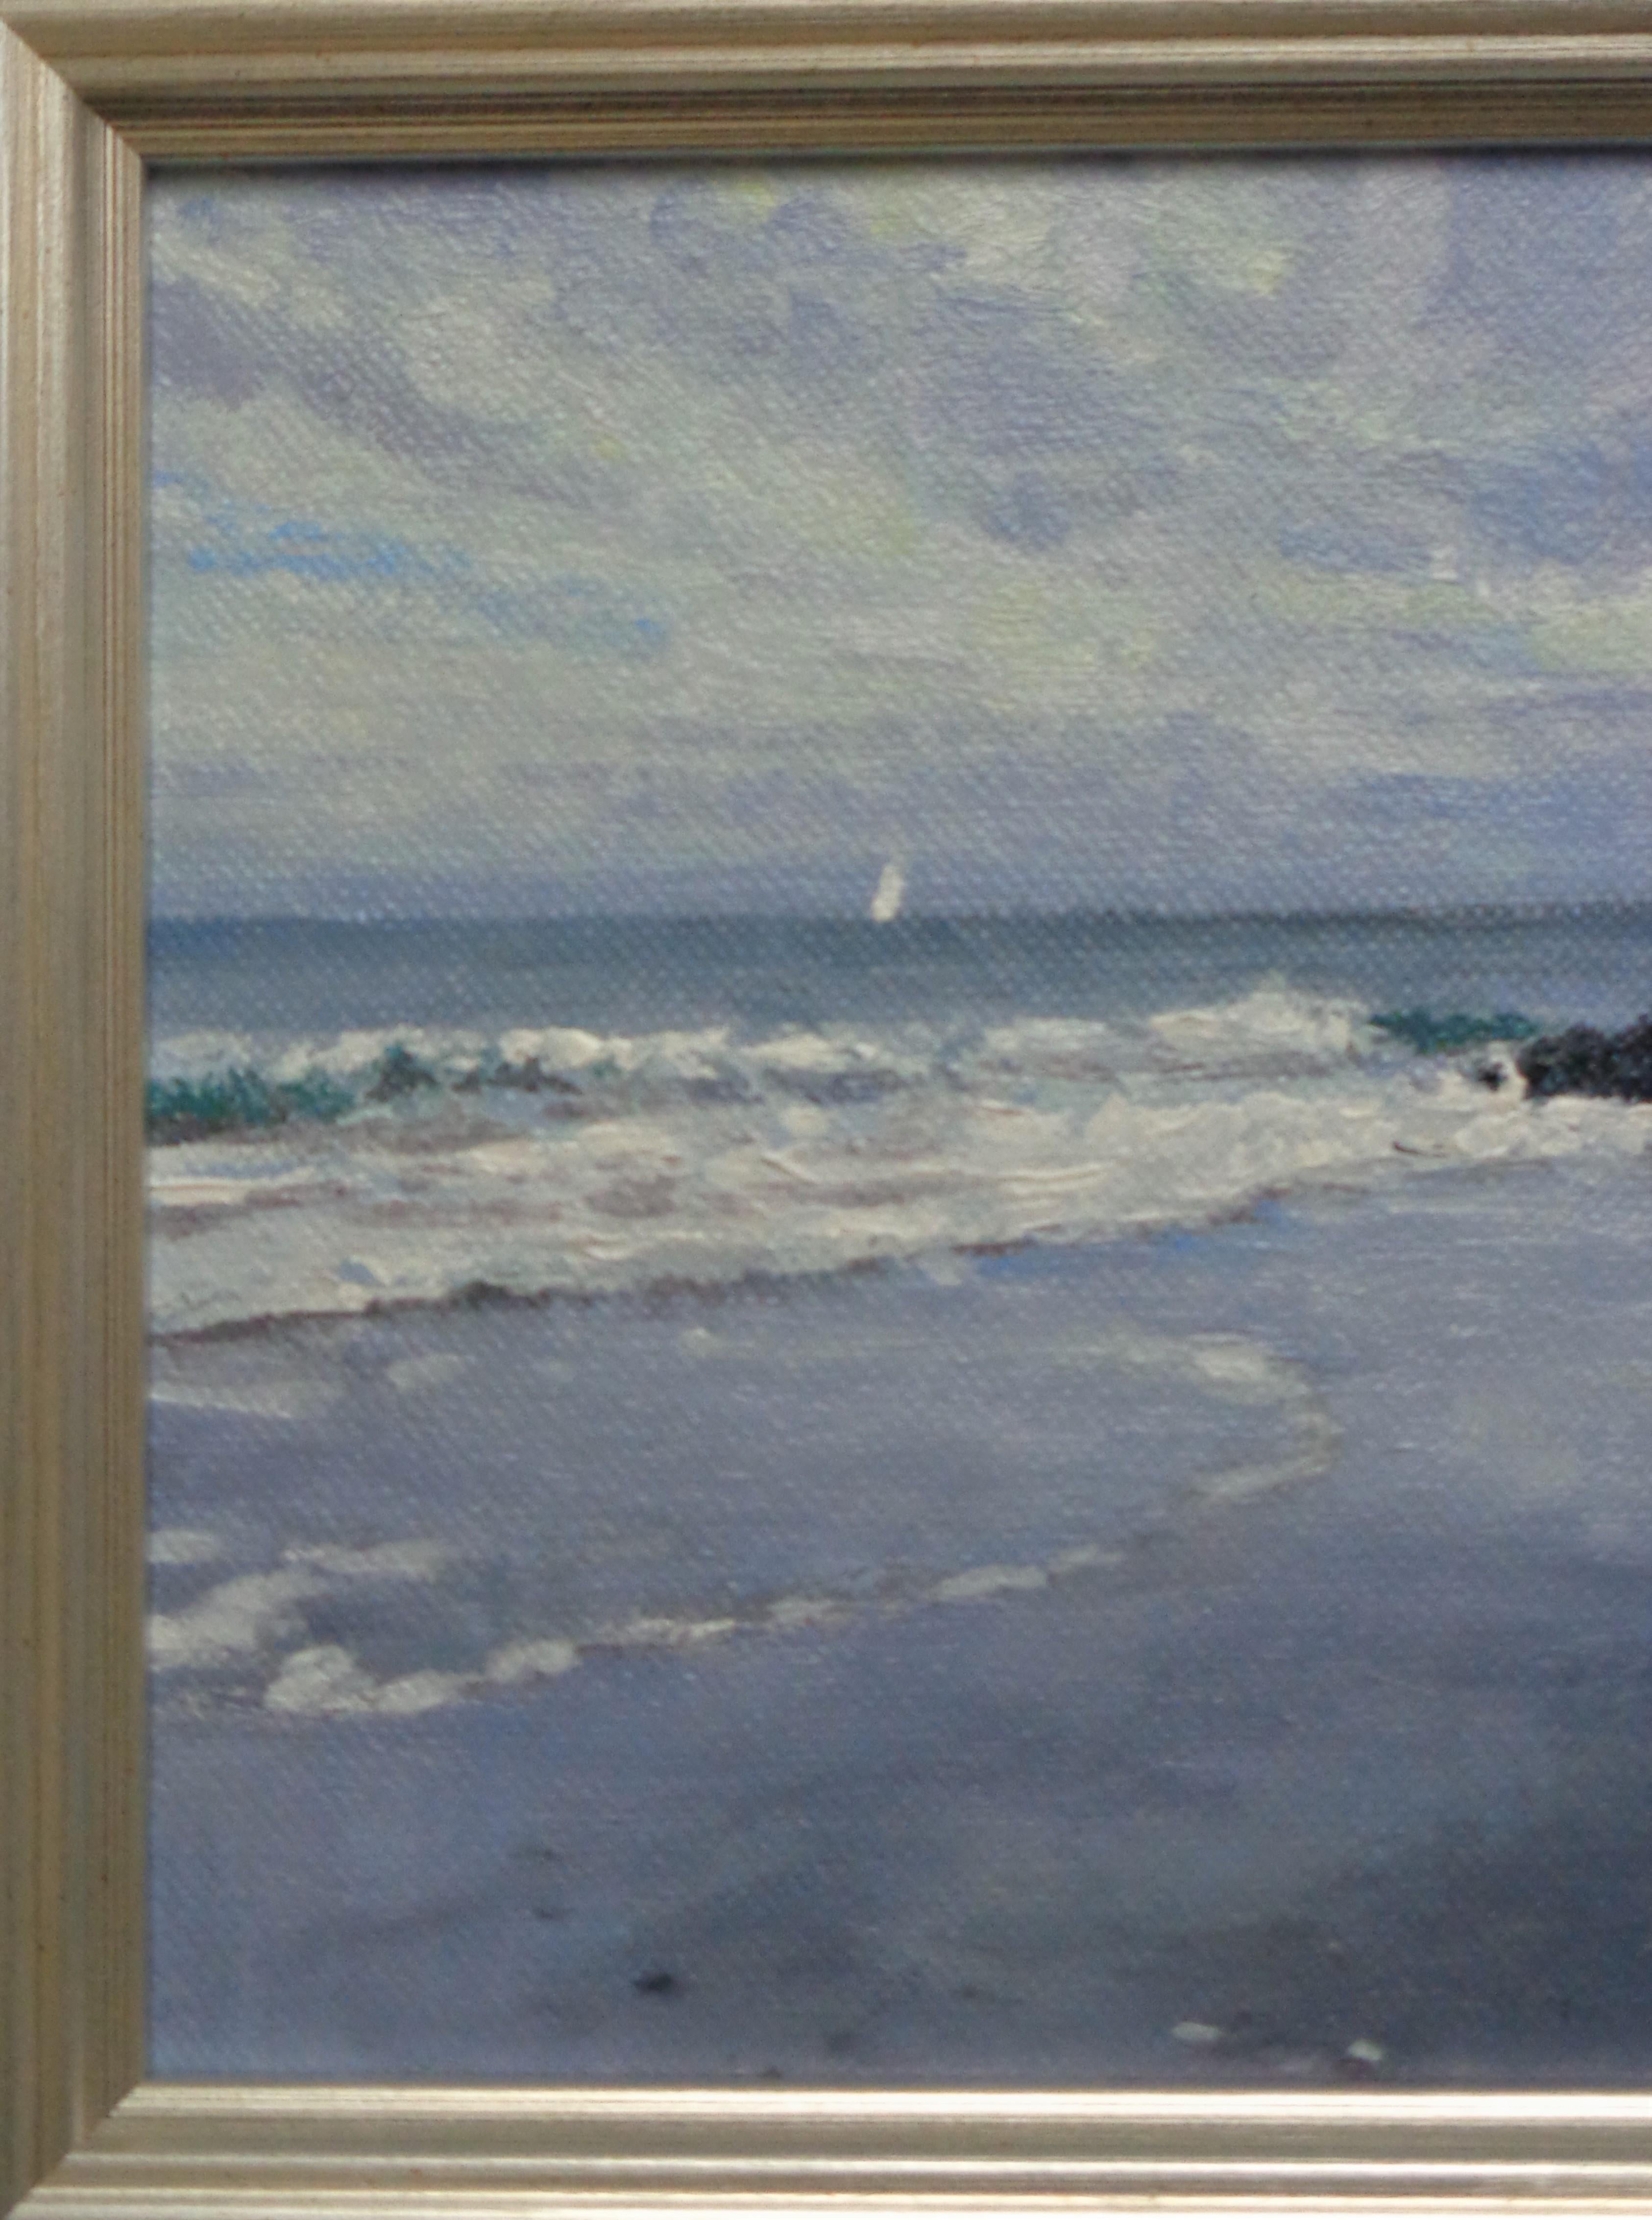  Impressionistic Seascape Oil Painting Michael Budden Beach Ocean Sail Boat Surf For Sale 2